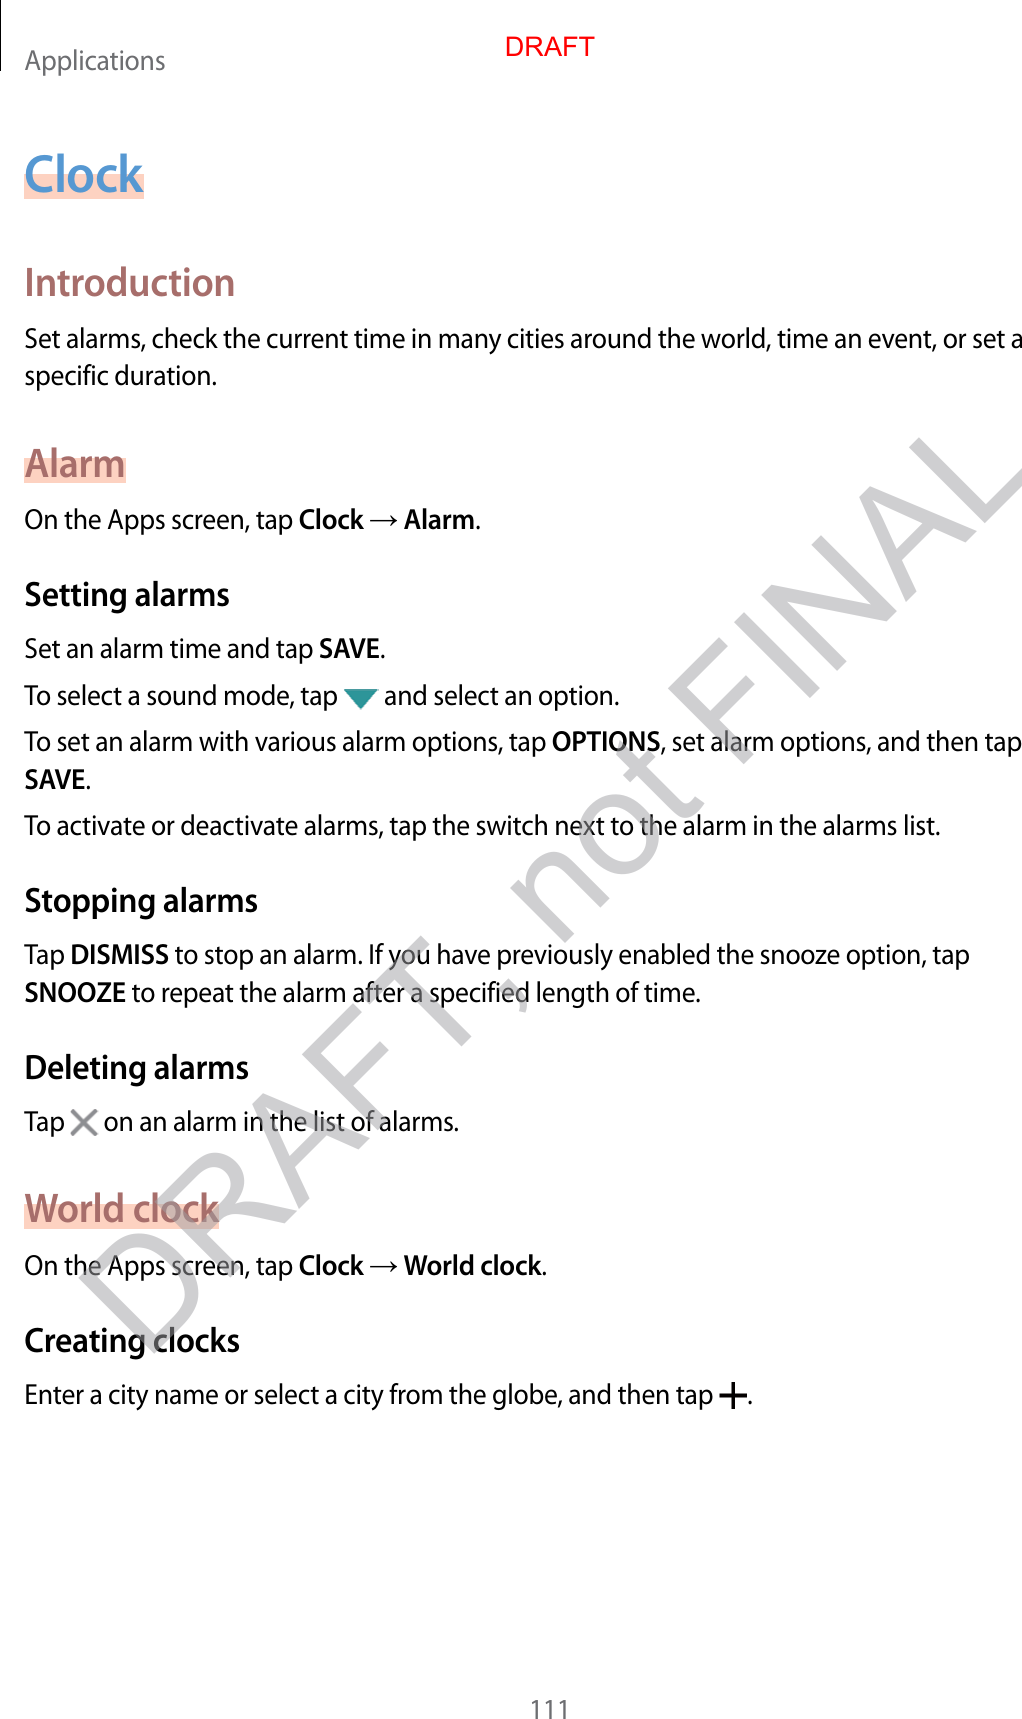 Applications111ClockIntroductionSet alarms, check the current time in man y cities ar ound the w orld , time an ev ent, or set a specific duration.AlarmOn the Apps screen, tap Clock  Alarm.Setting alarmsSet an alarm time and tap SAVE.To select a sound mode, tap   and select an option.To set an alarm with various alarm options, tap OPTIONS, set alarm options, and then tap SAVE.To activate or deactivate alarms, tap the switch ne xt to the alarm in the alarms list.Stopping alarmsTap DISMISS to stop an alarm. If you hav e pr eviously enabled the snoo z e option, tap SNOOZE to repea t the alarm after a specified length of time.Deleting alarmsTap   on an alarm in the list of alarms.World clockOn the Apps screen, tap Clock  World clock.Crea ting clocksEnter a city name or select a city from the globe , and then tap  .DRAFTDRAFT, not FINAL